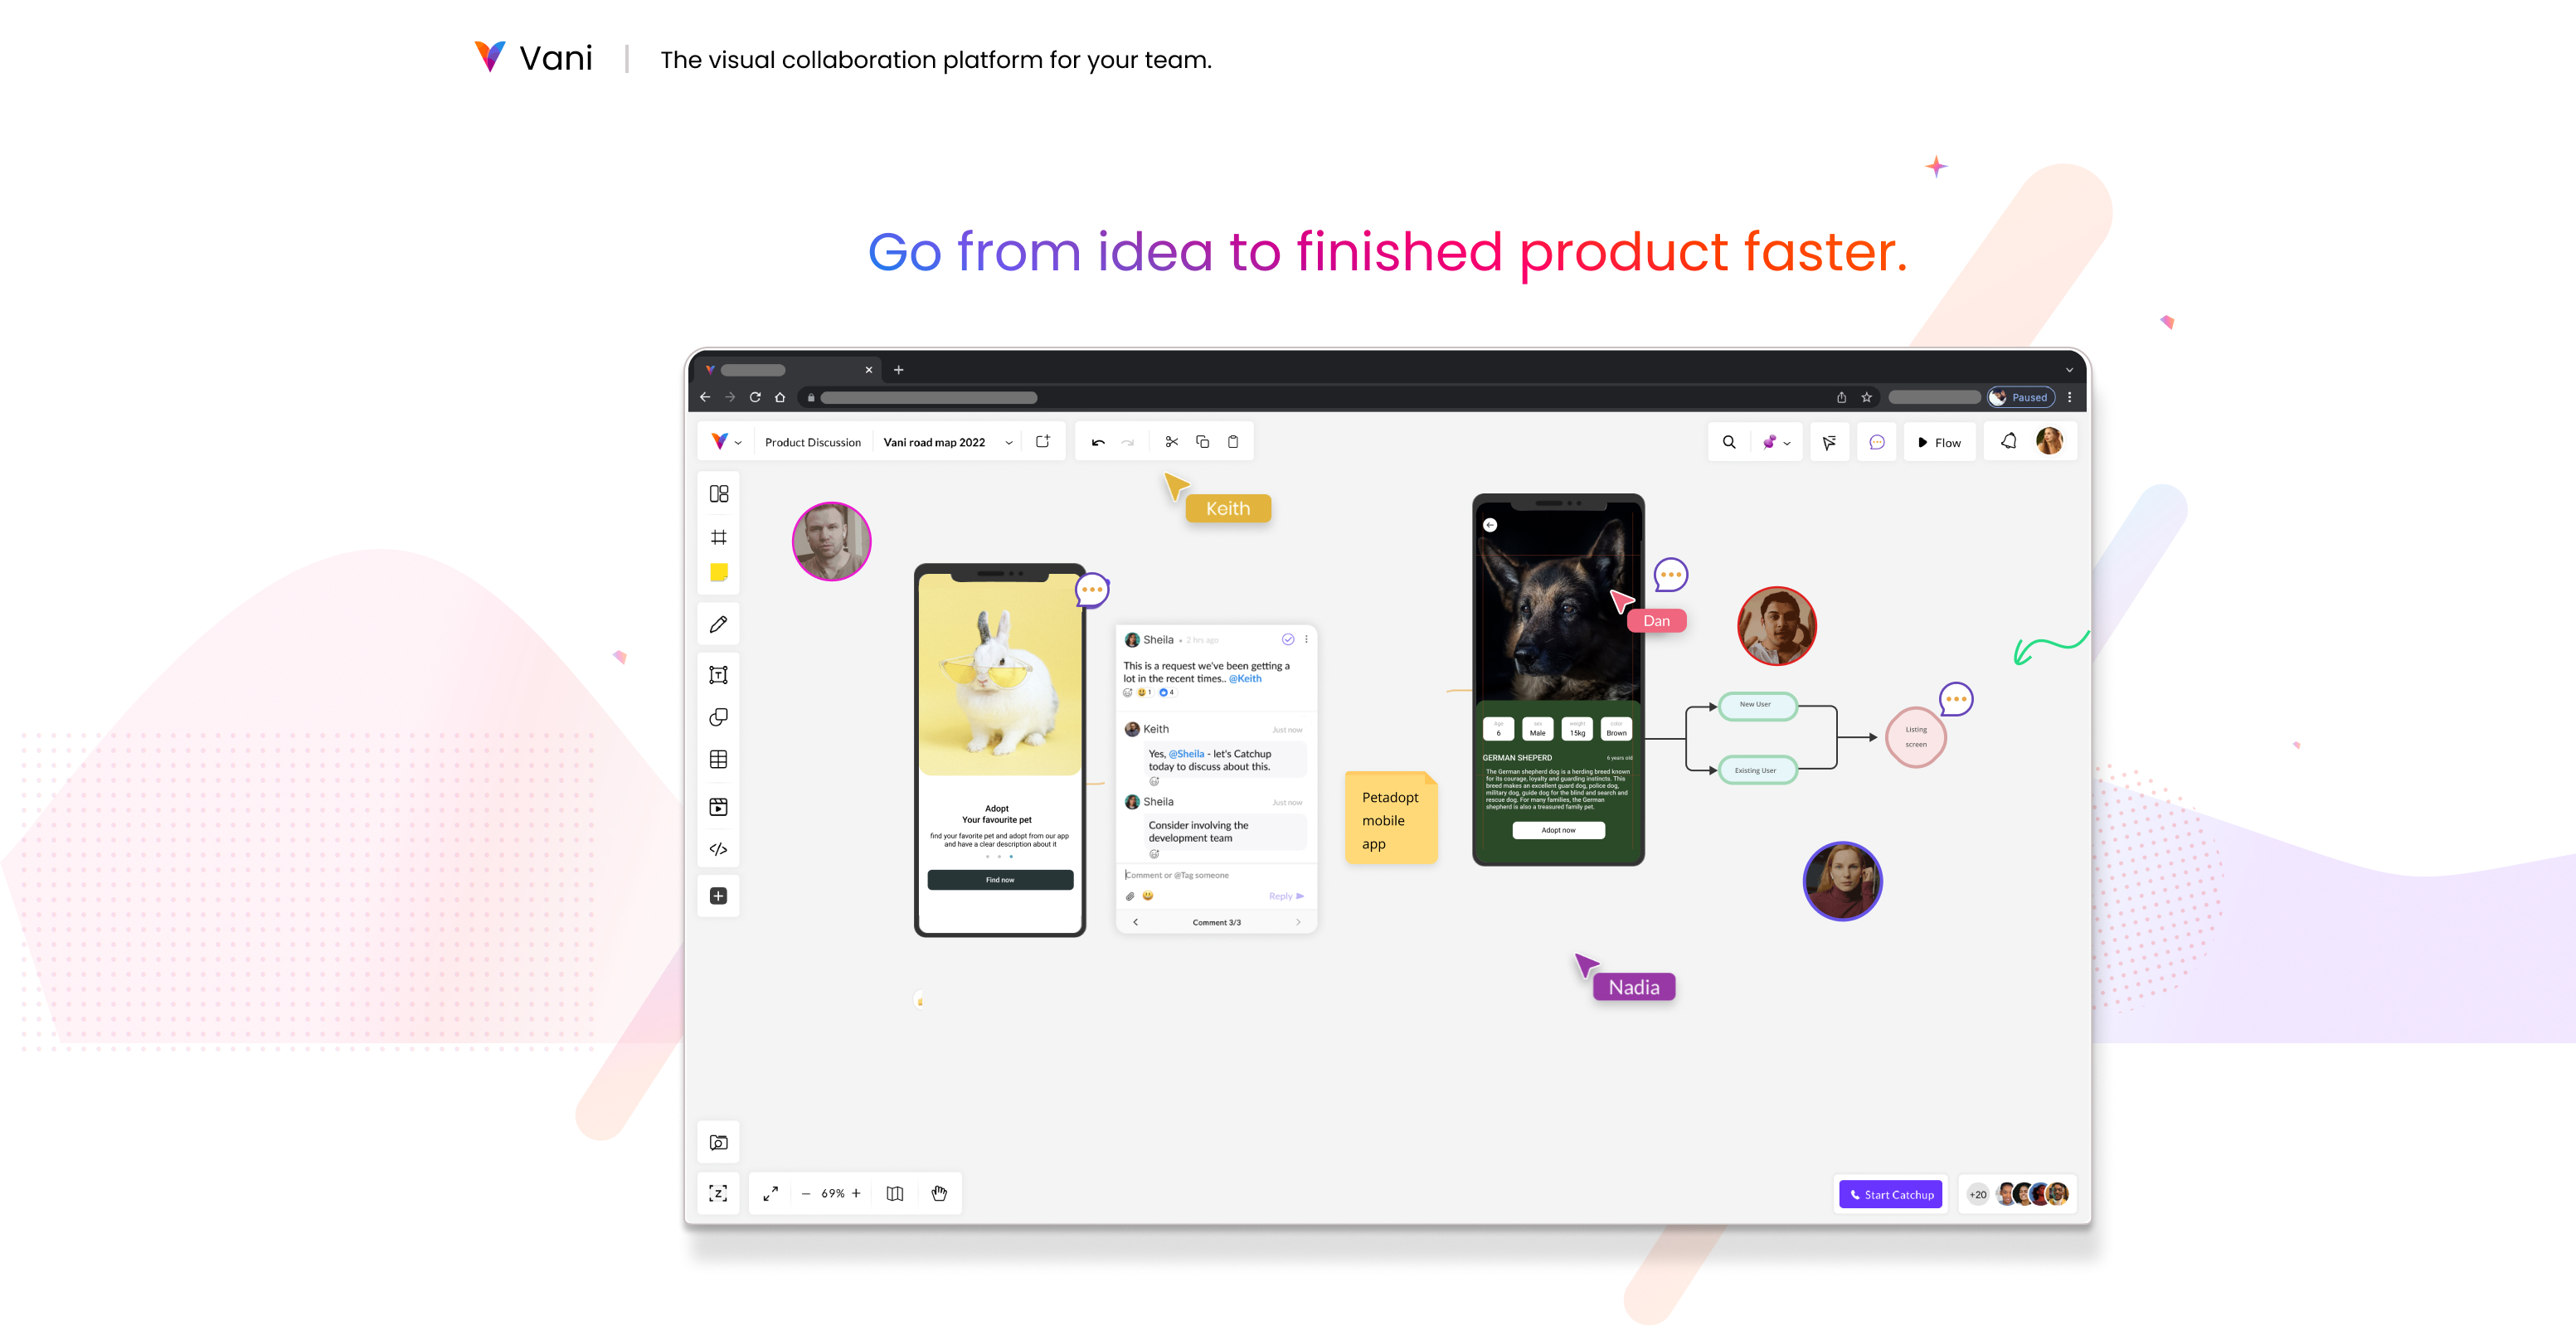 Go from idea to finished product faster.